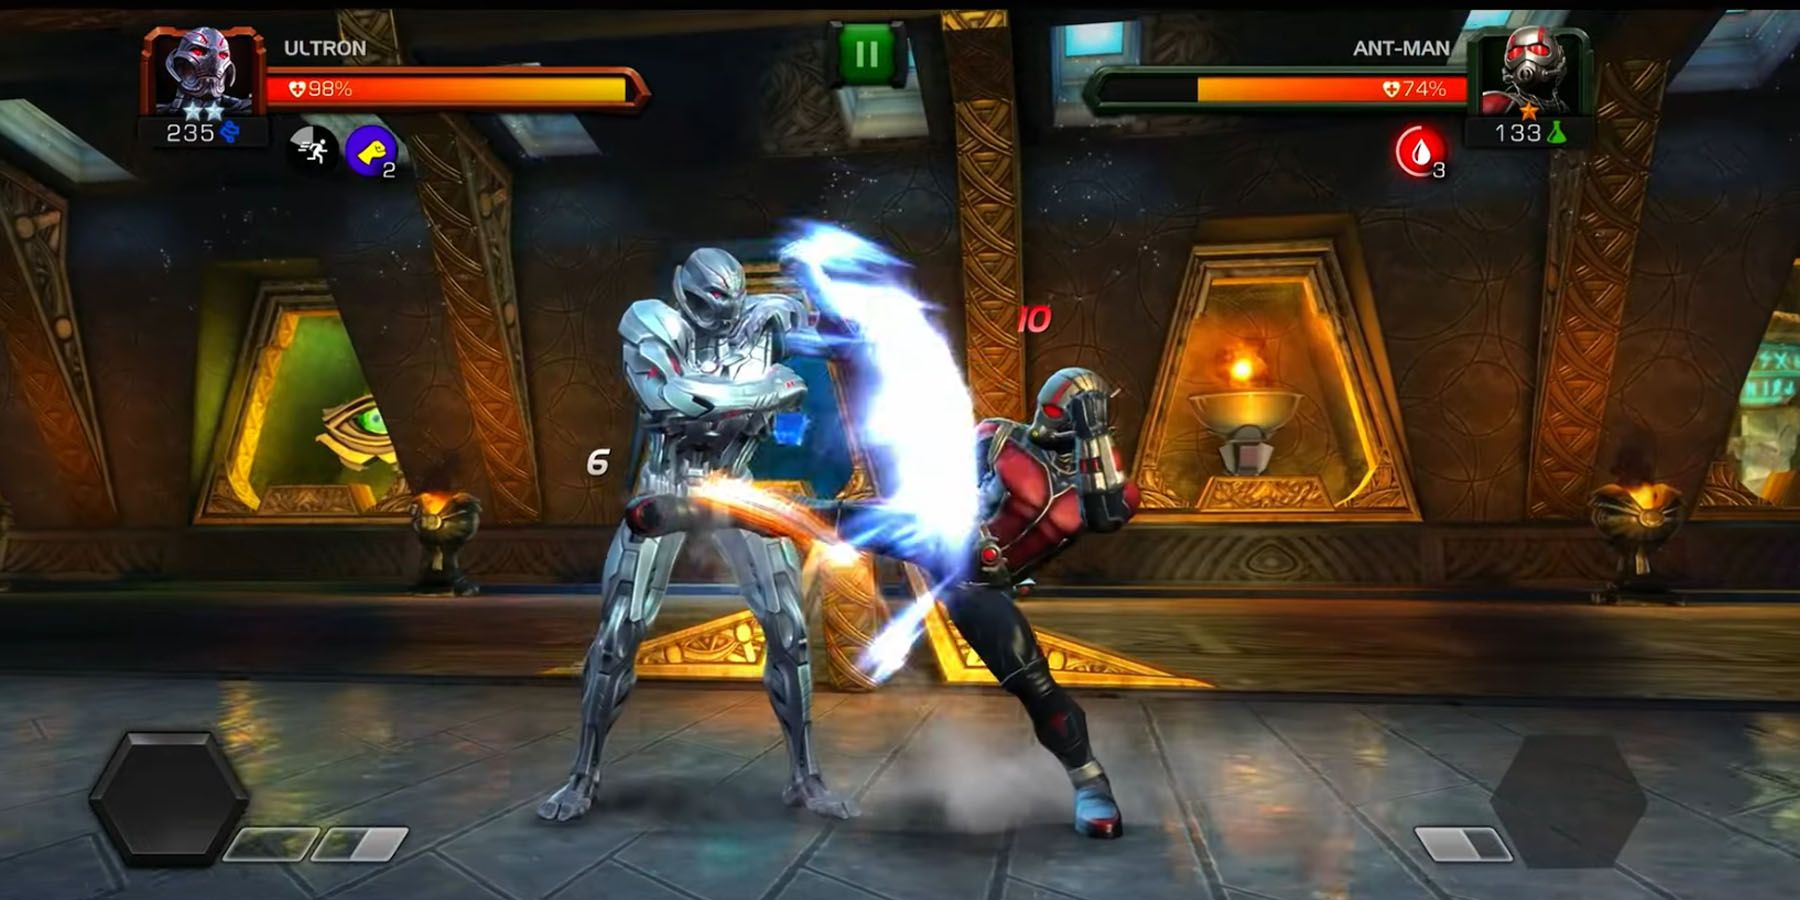 Ant-Man fighting Ultron in Contest of Champions